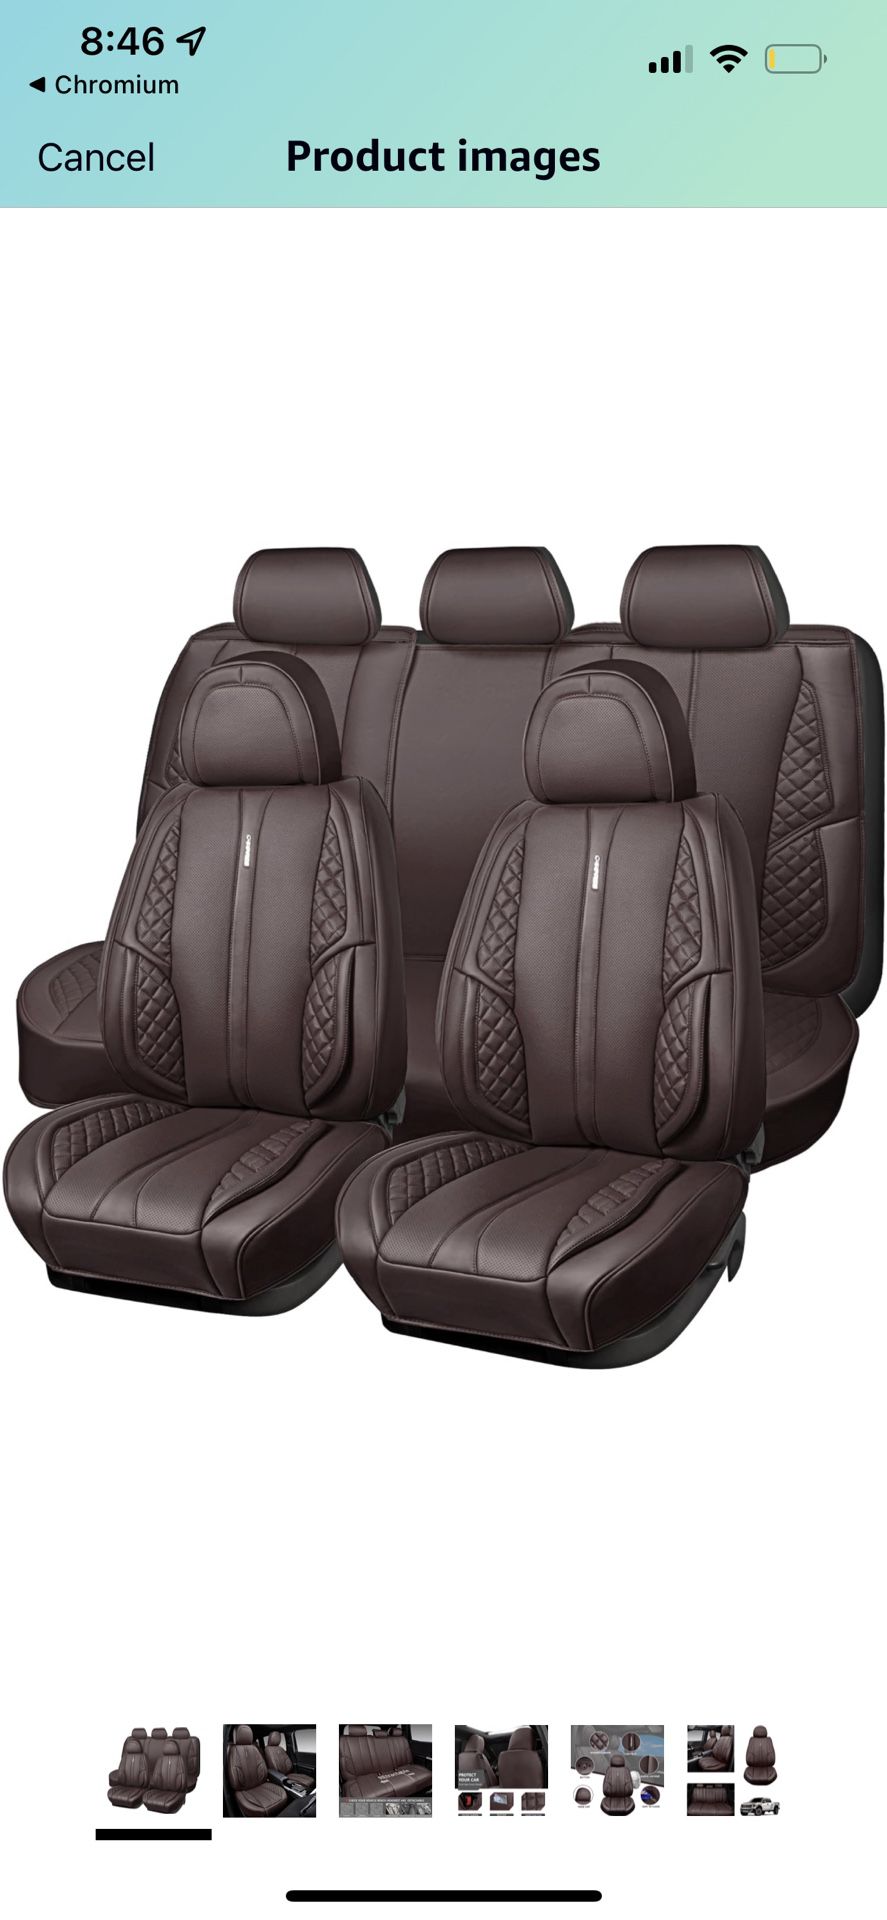 CAR PASS Nappa Leather Car Seat Universal Brown